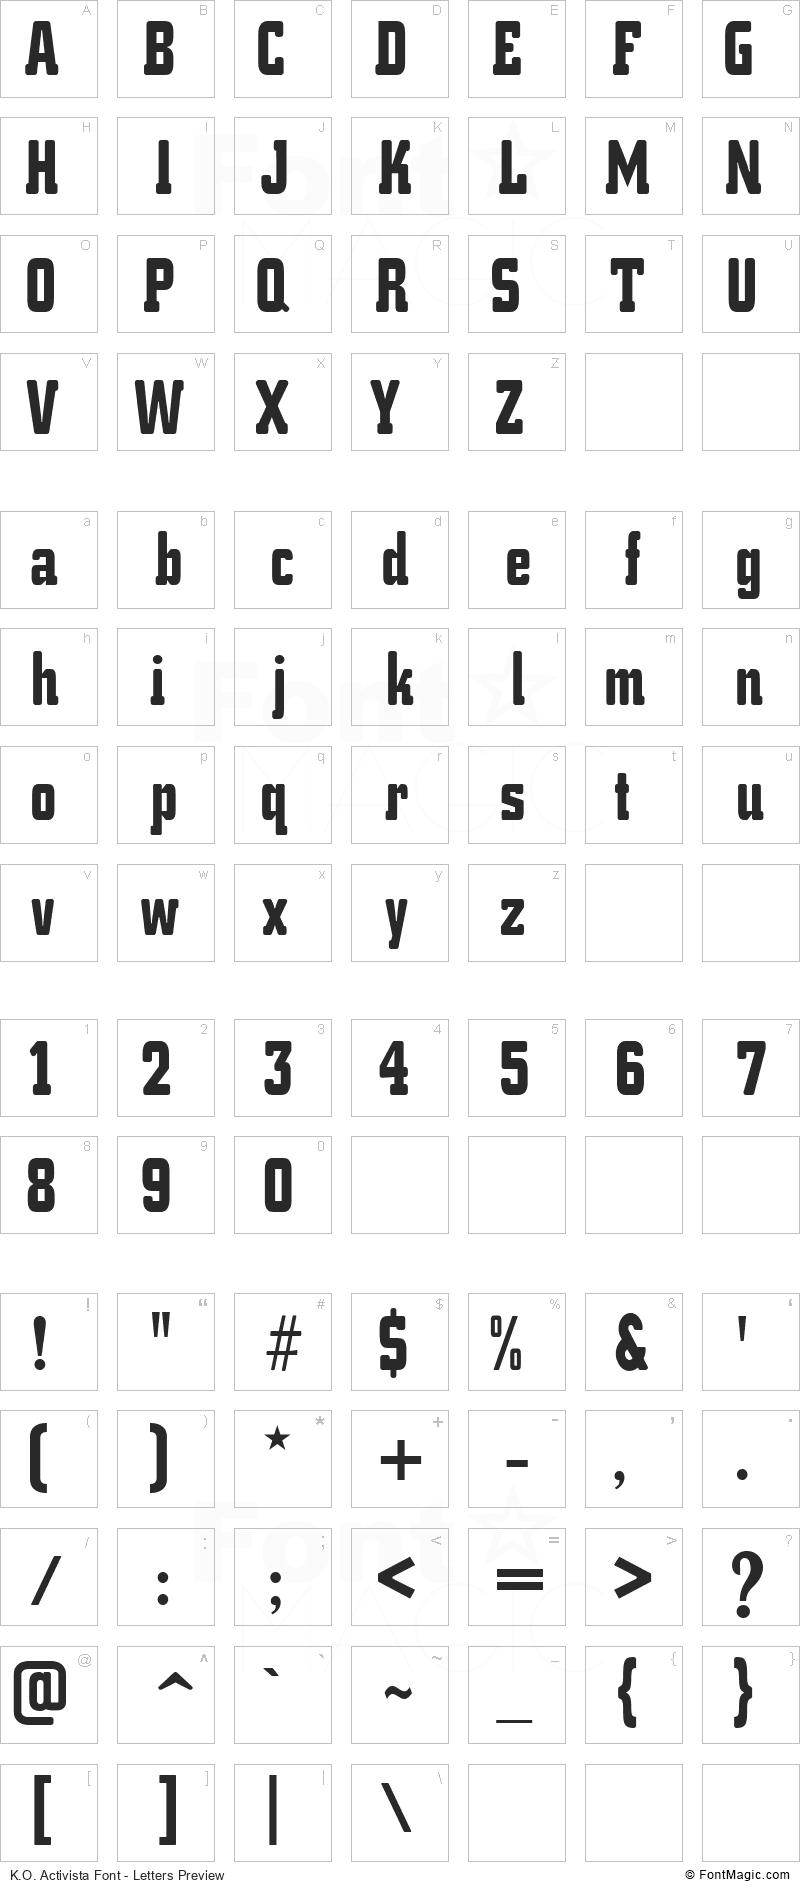 K.O. Activista Font - All Latters Preview Chart